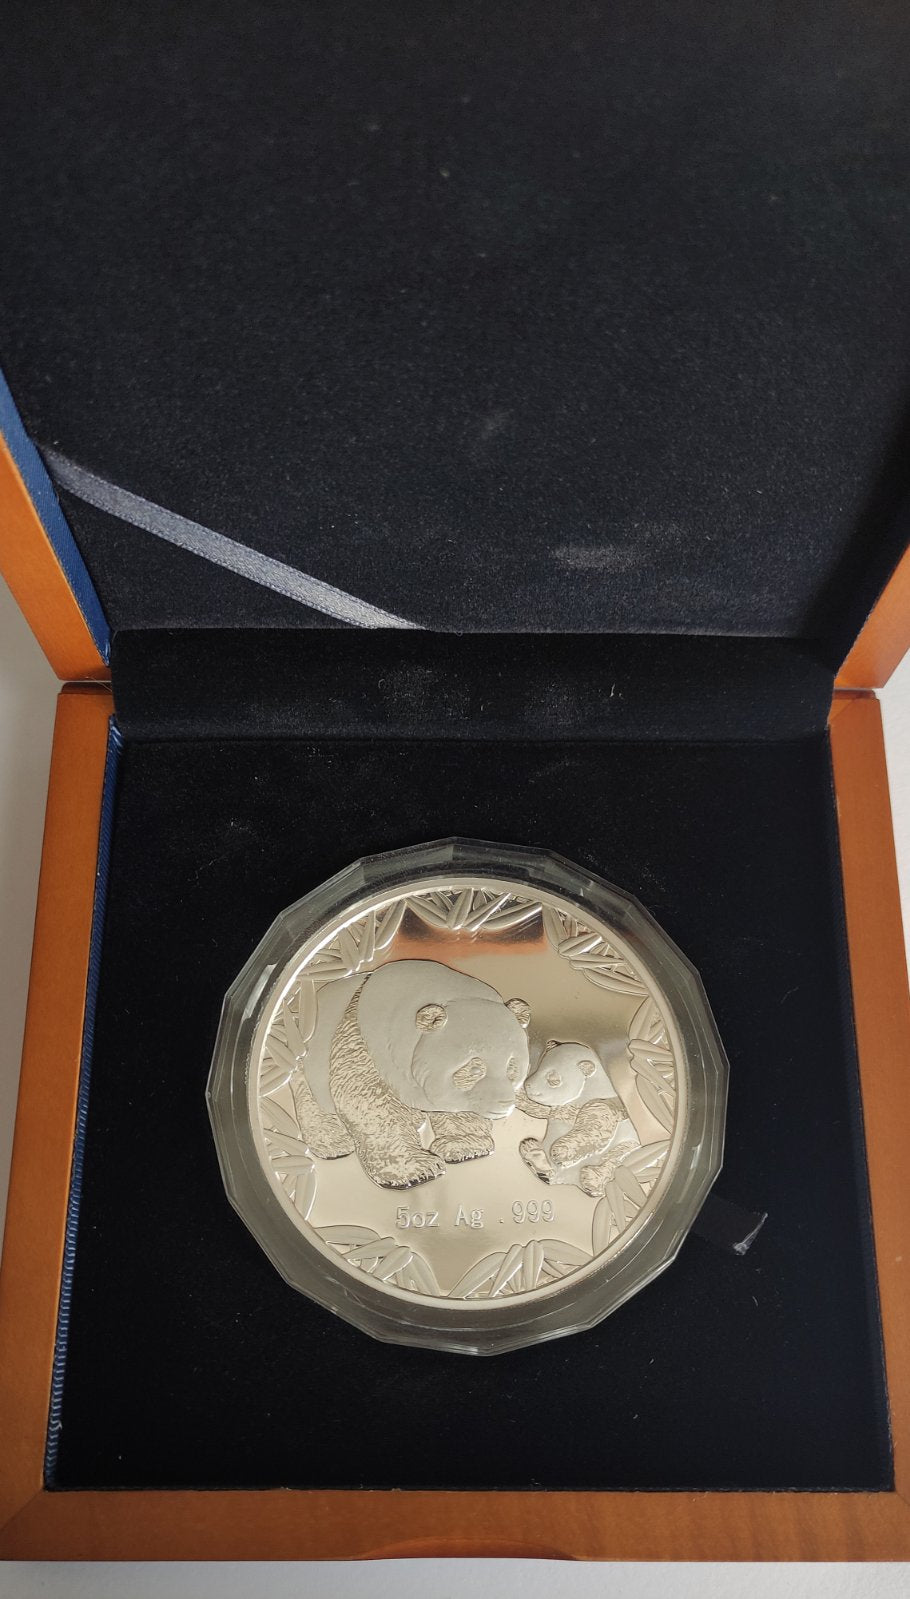 2012 Chinese American World Money's Fair Panda 5 oz Proof Silver Coin in Capsule with Box and COA